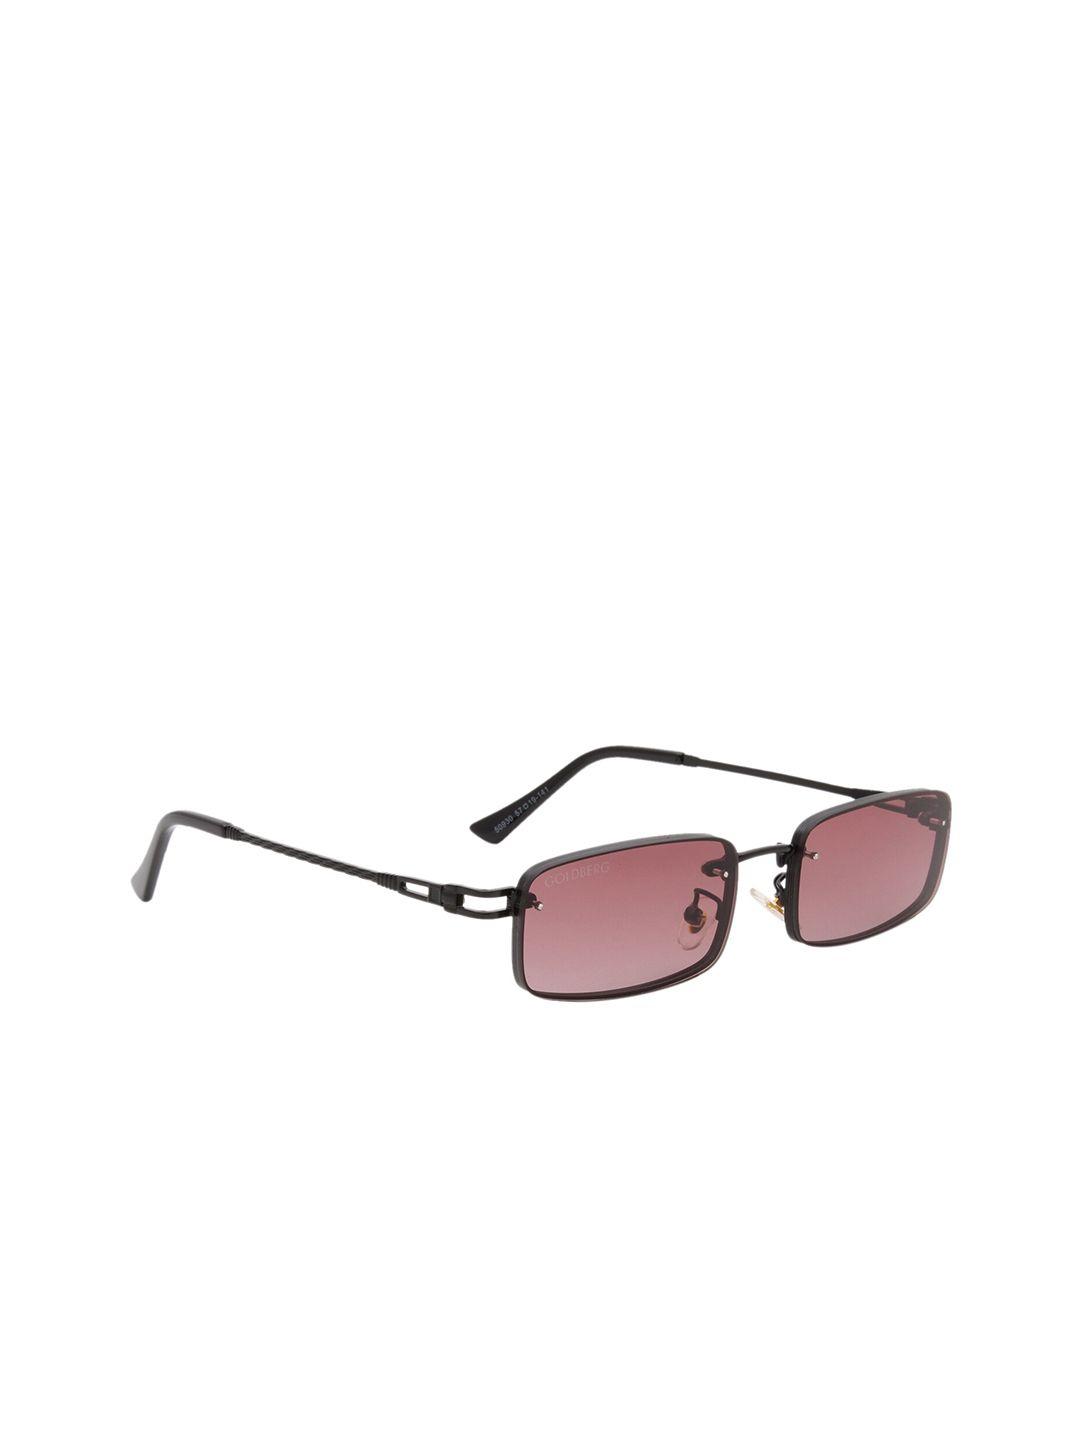 gold berg pink lens & black rectangle sunglasses with uv protected lens- gb-50930_blk-pink